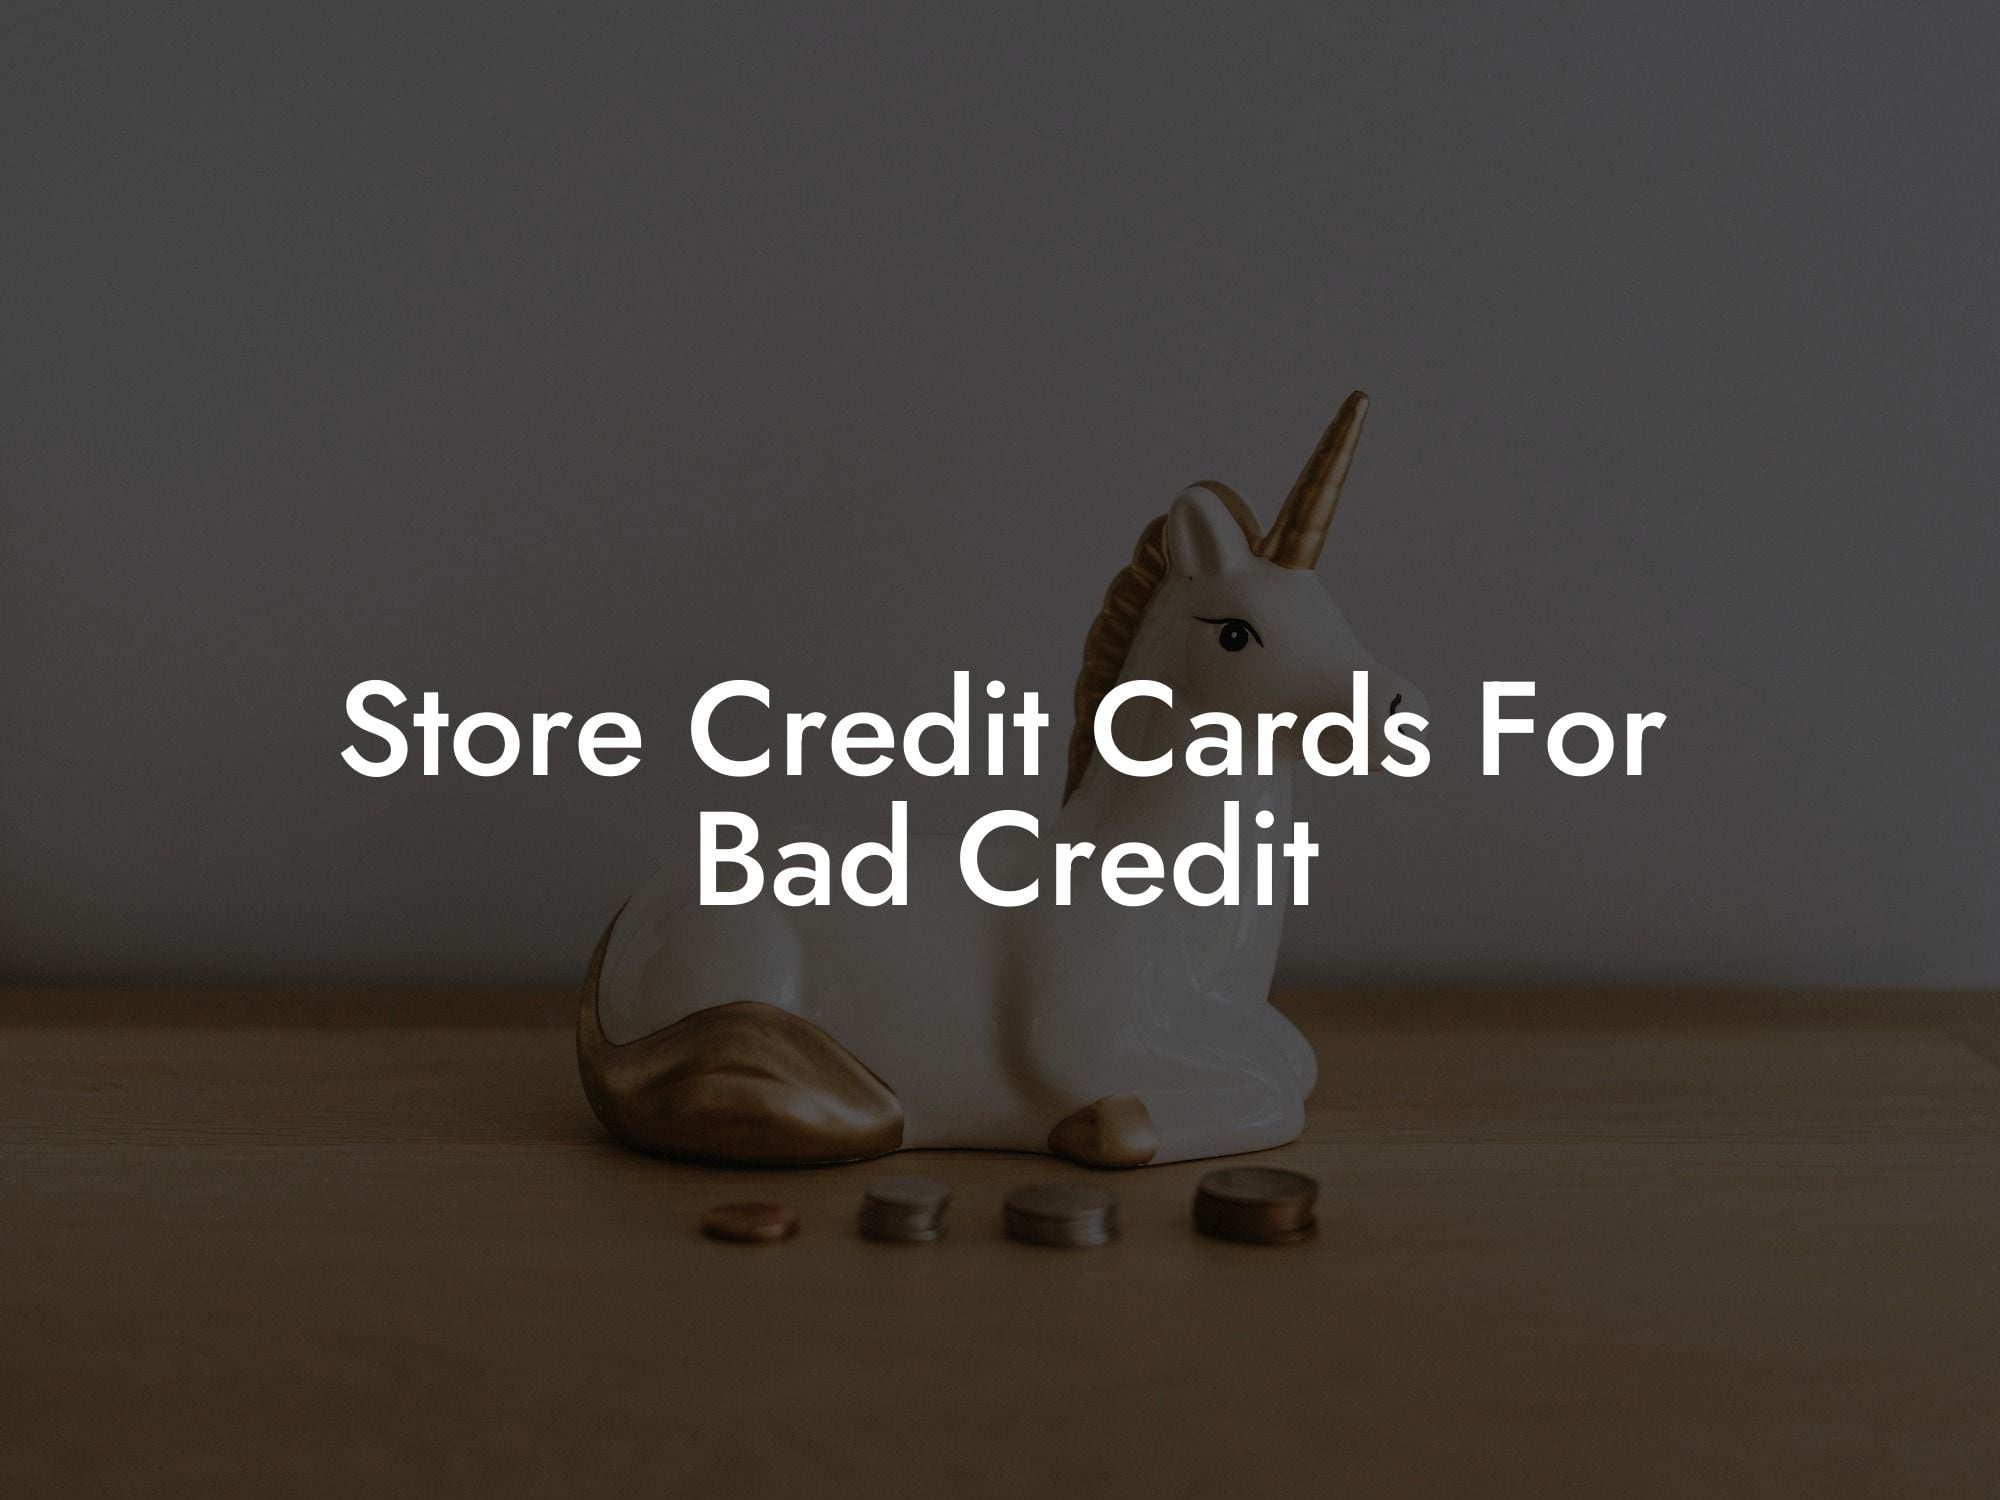 Store Credit Cards For Bad Credit